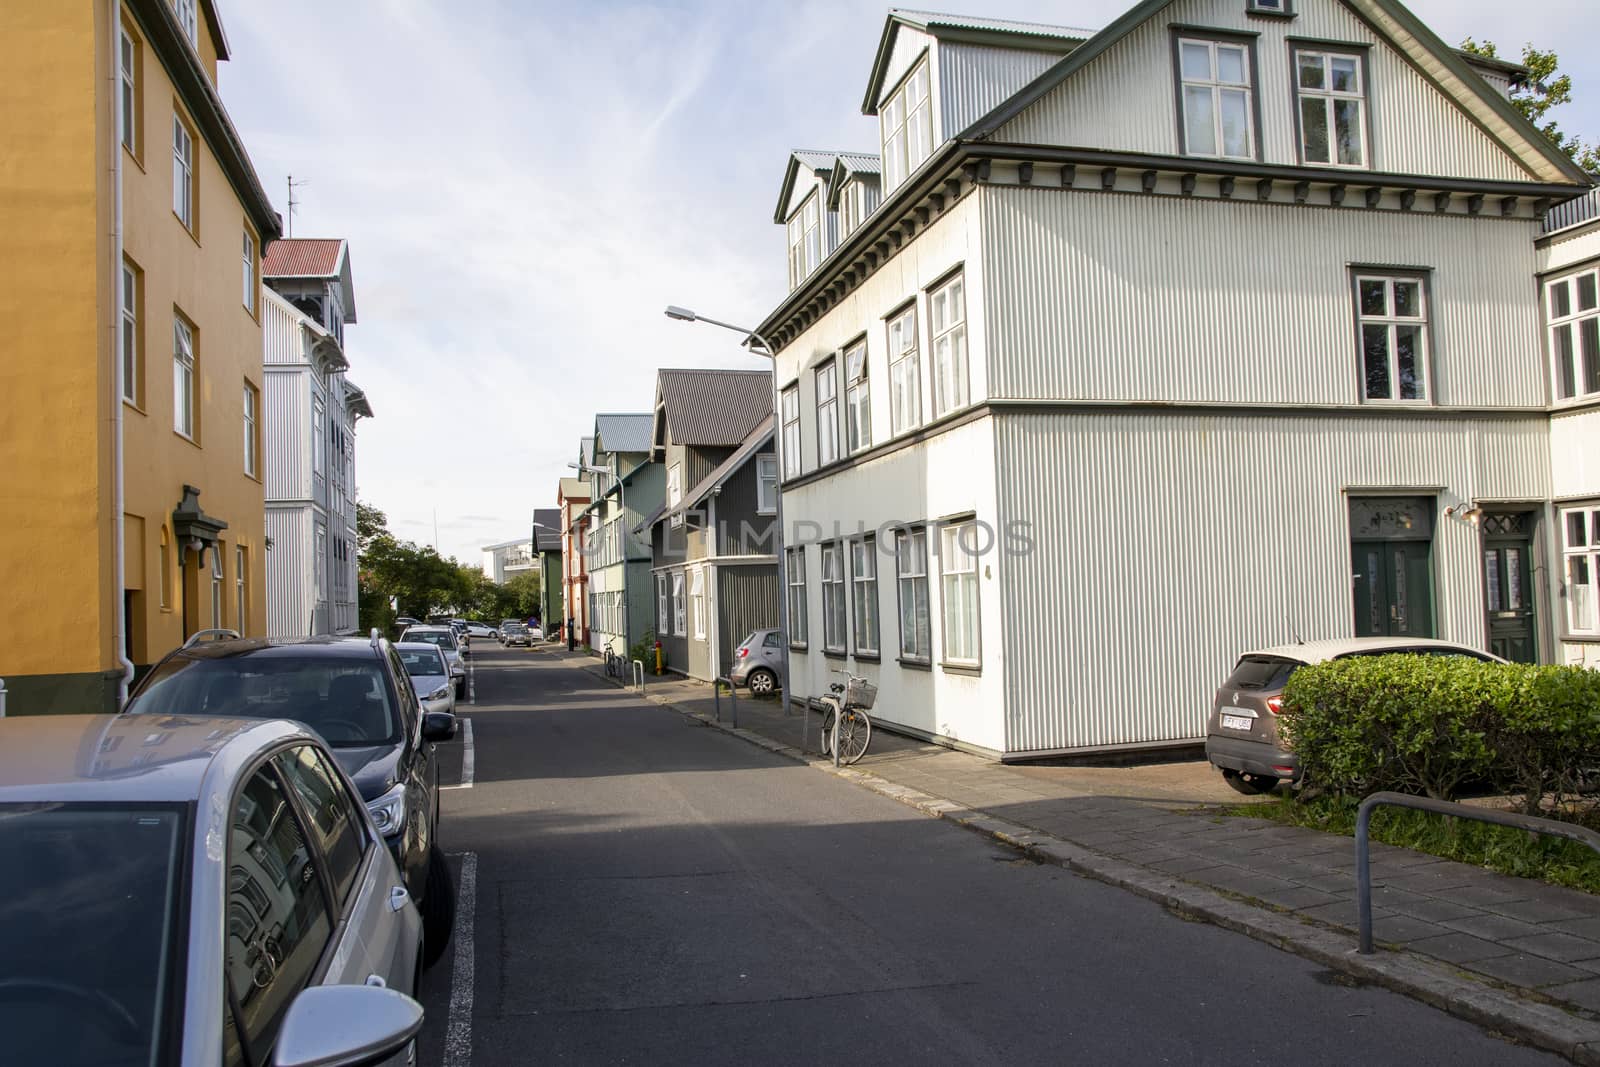 view on the historical houses of Midstraeti, Reykjavik, Iceland by kb79